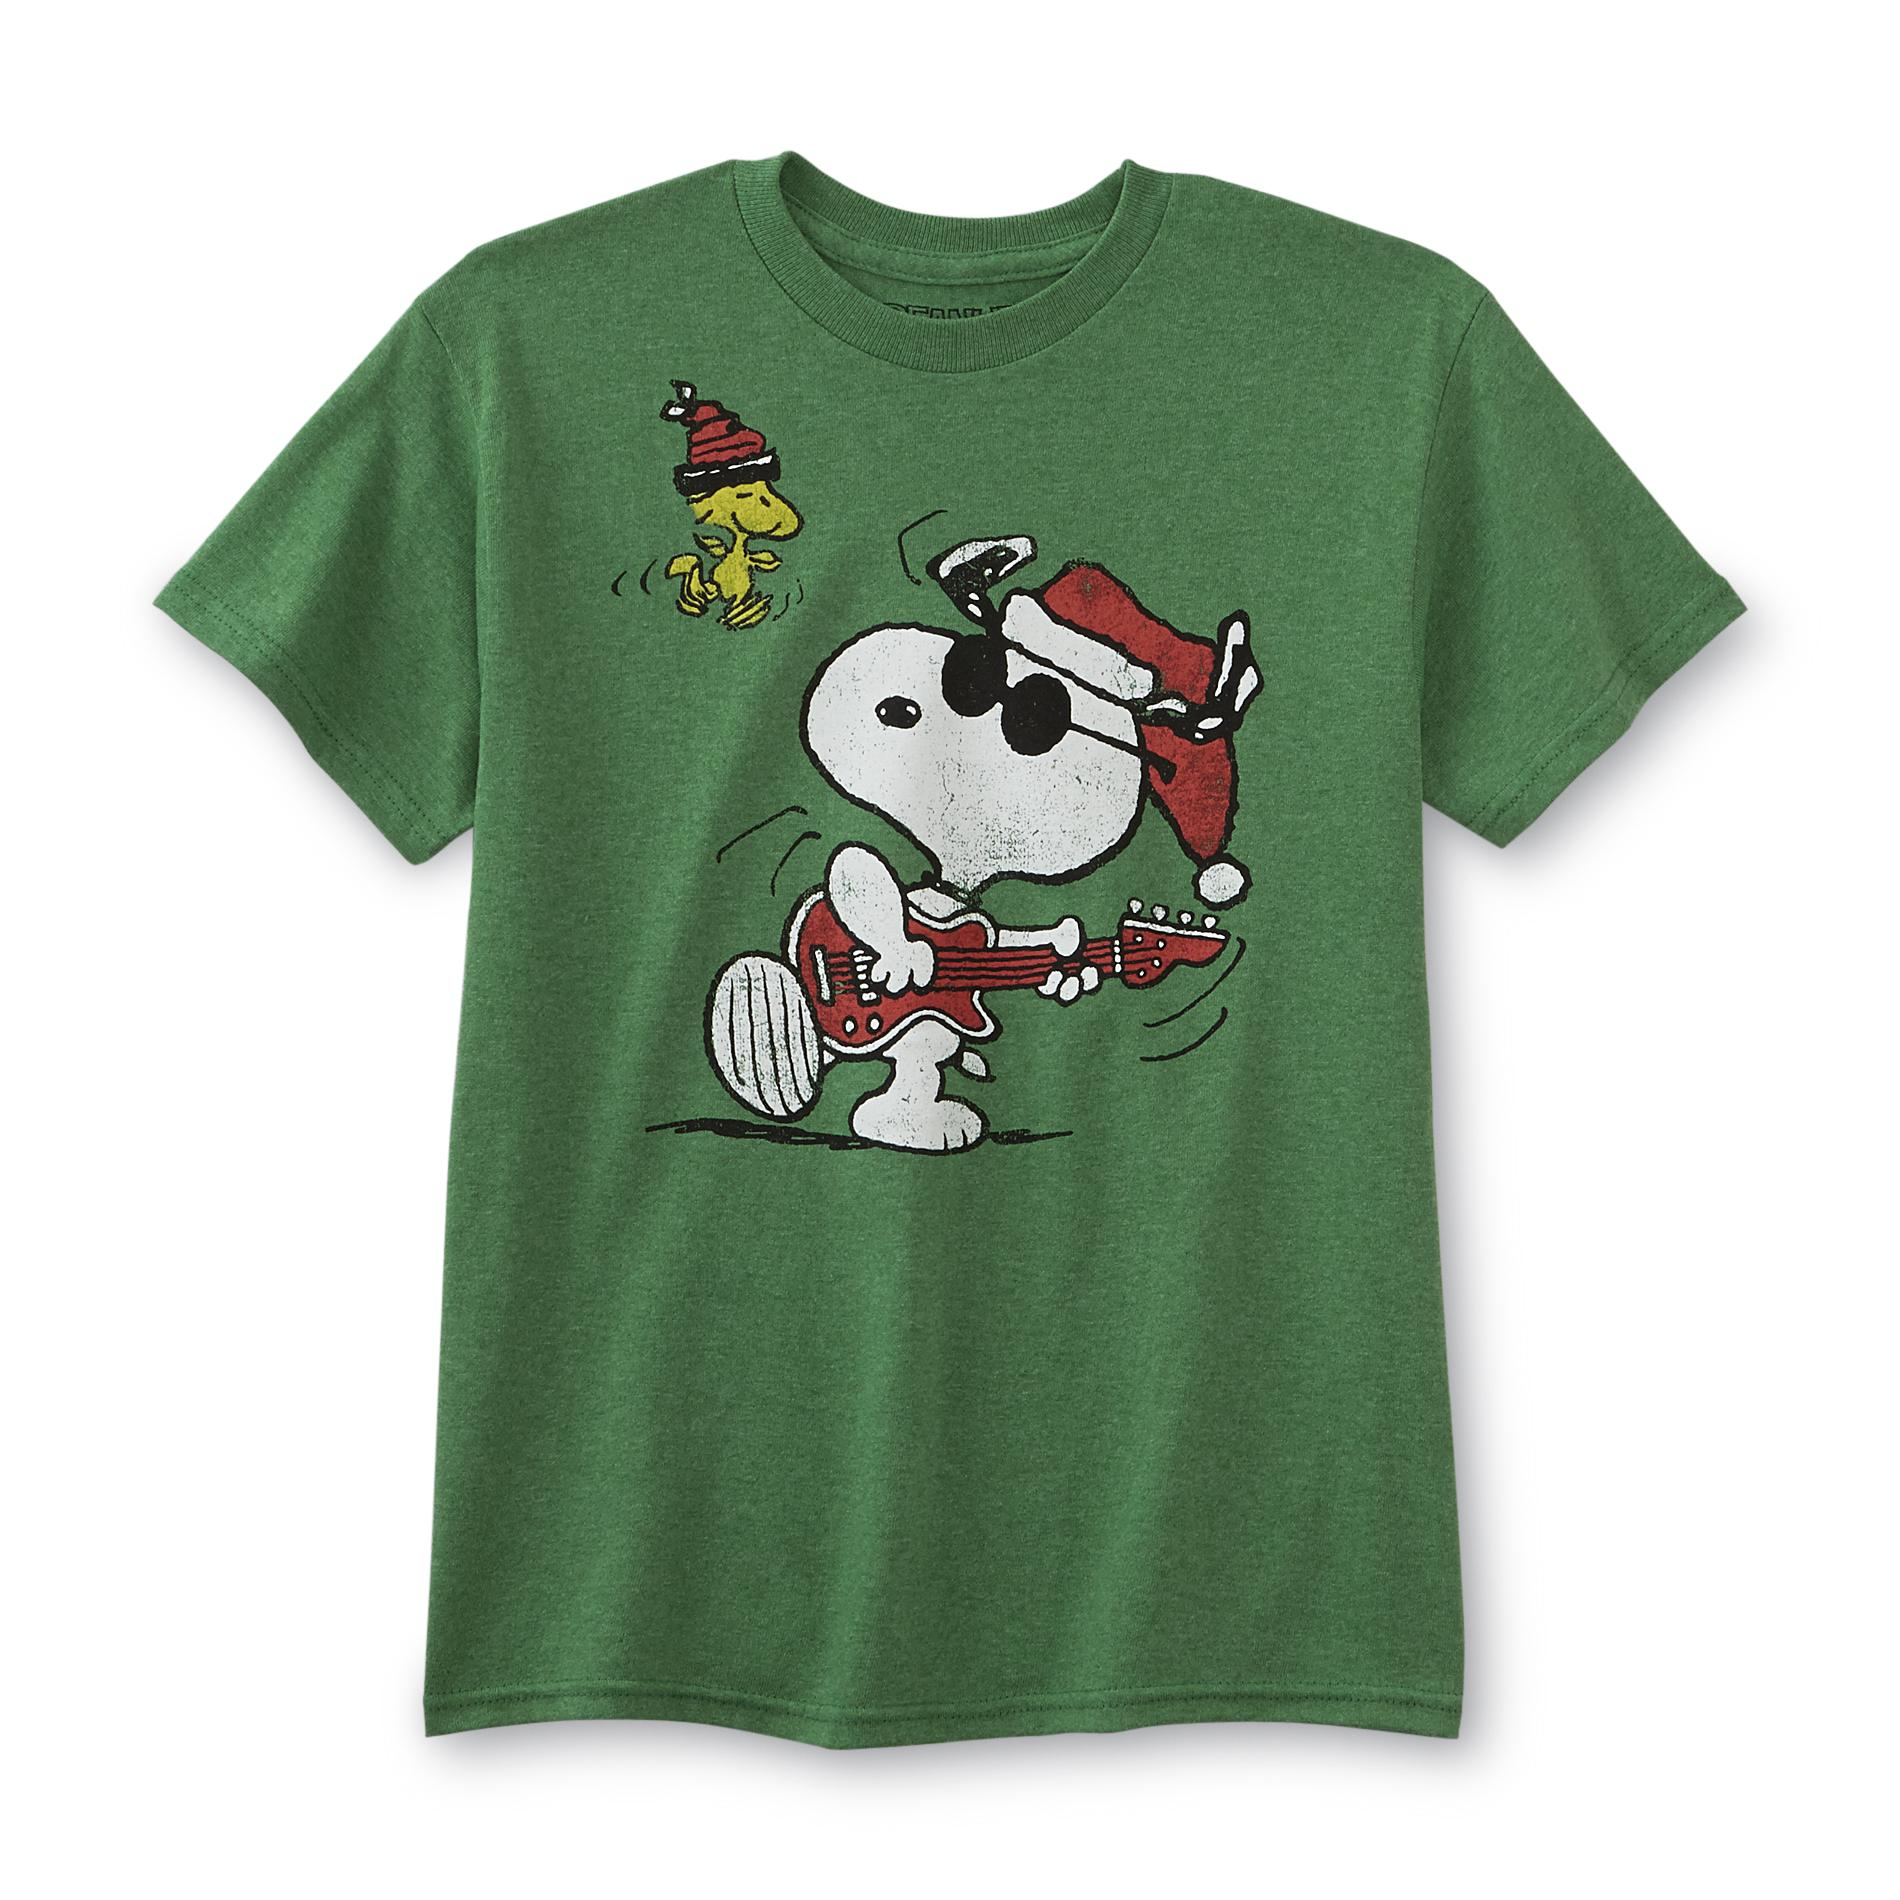 Peanuts By Schulz Snoopy Christmas Boy's Graphic T-Shirt